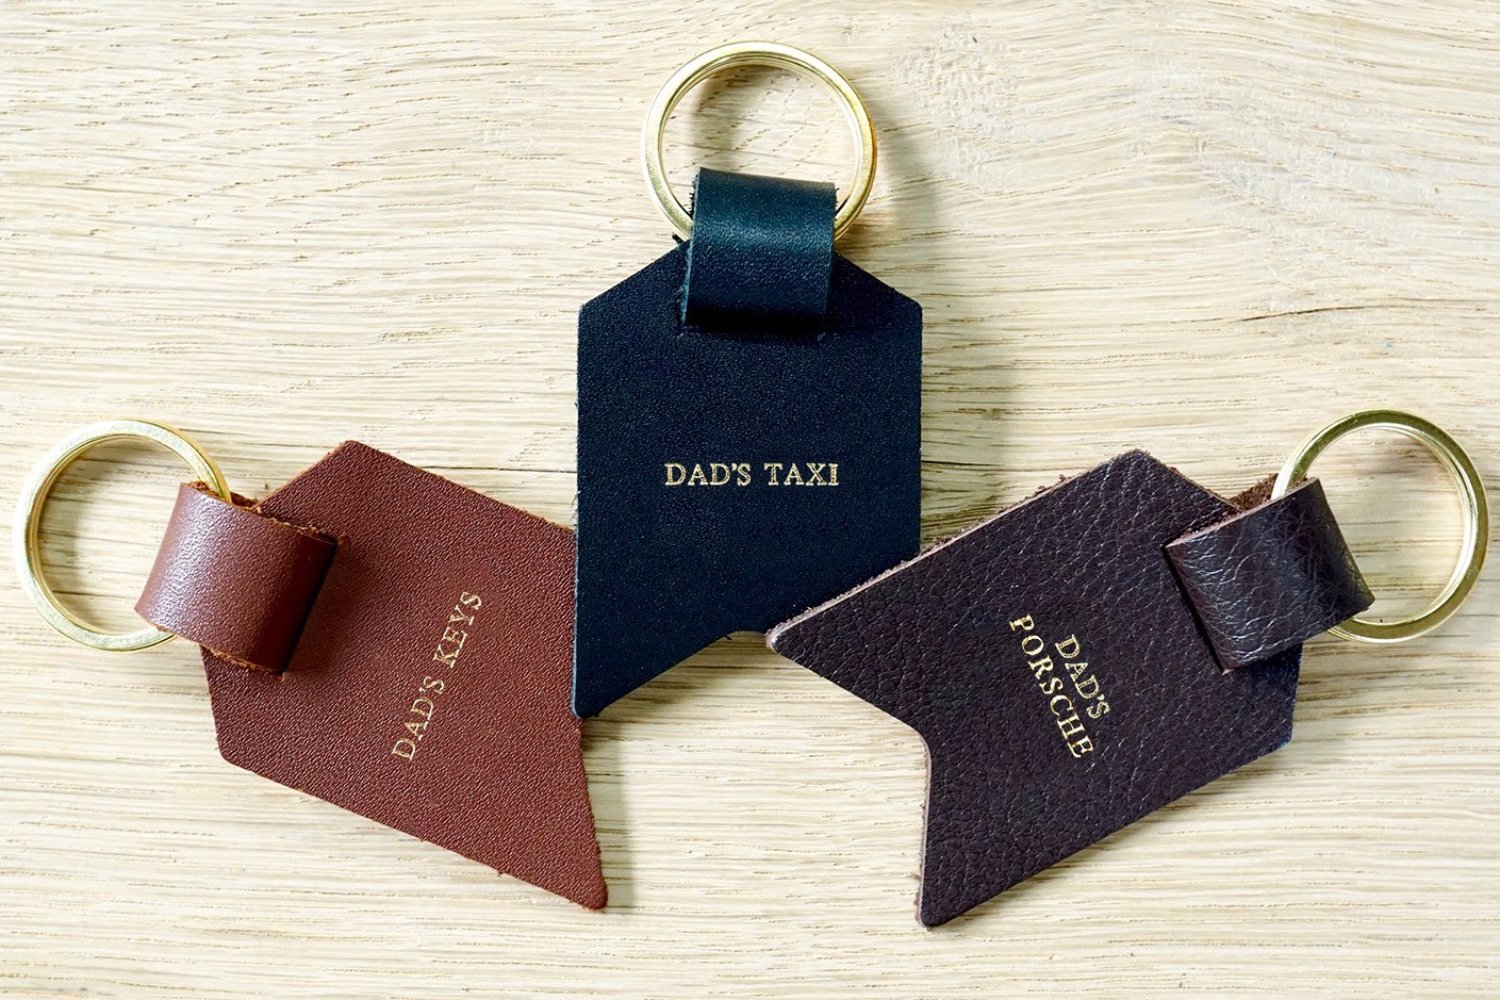 Personalised Daddy keyring from Bookshell Bindery with Dad's keys, Dad's taxi and Dad's Porsche embossed with gold foil